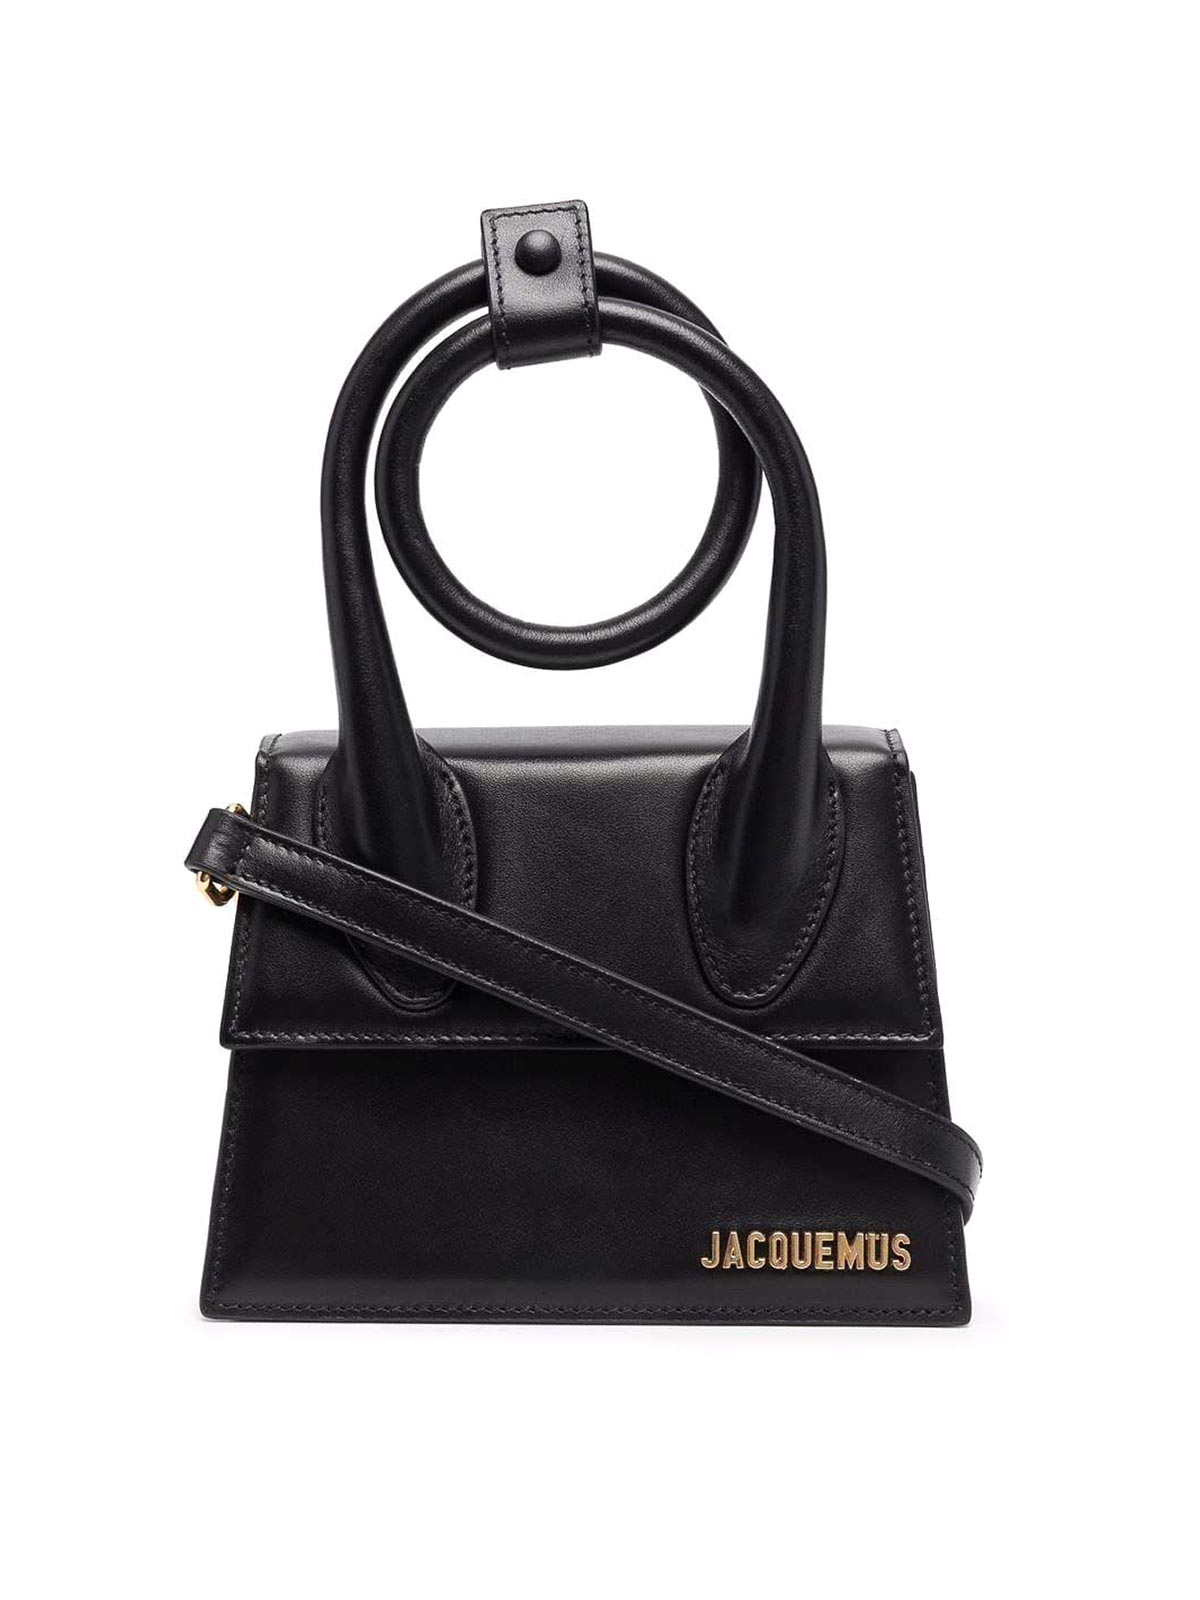 Jacquemus Le Chiquito Noeud Tote In Blue